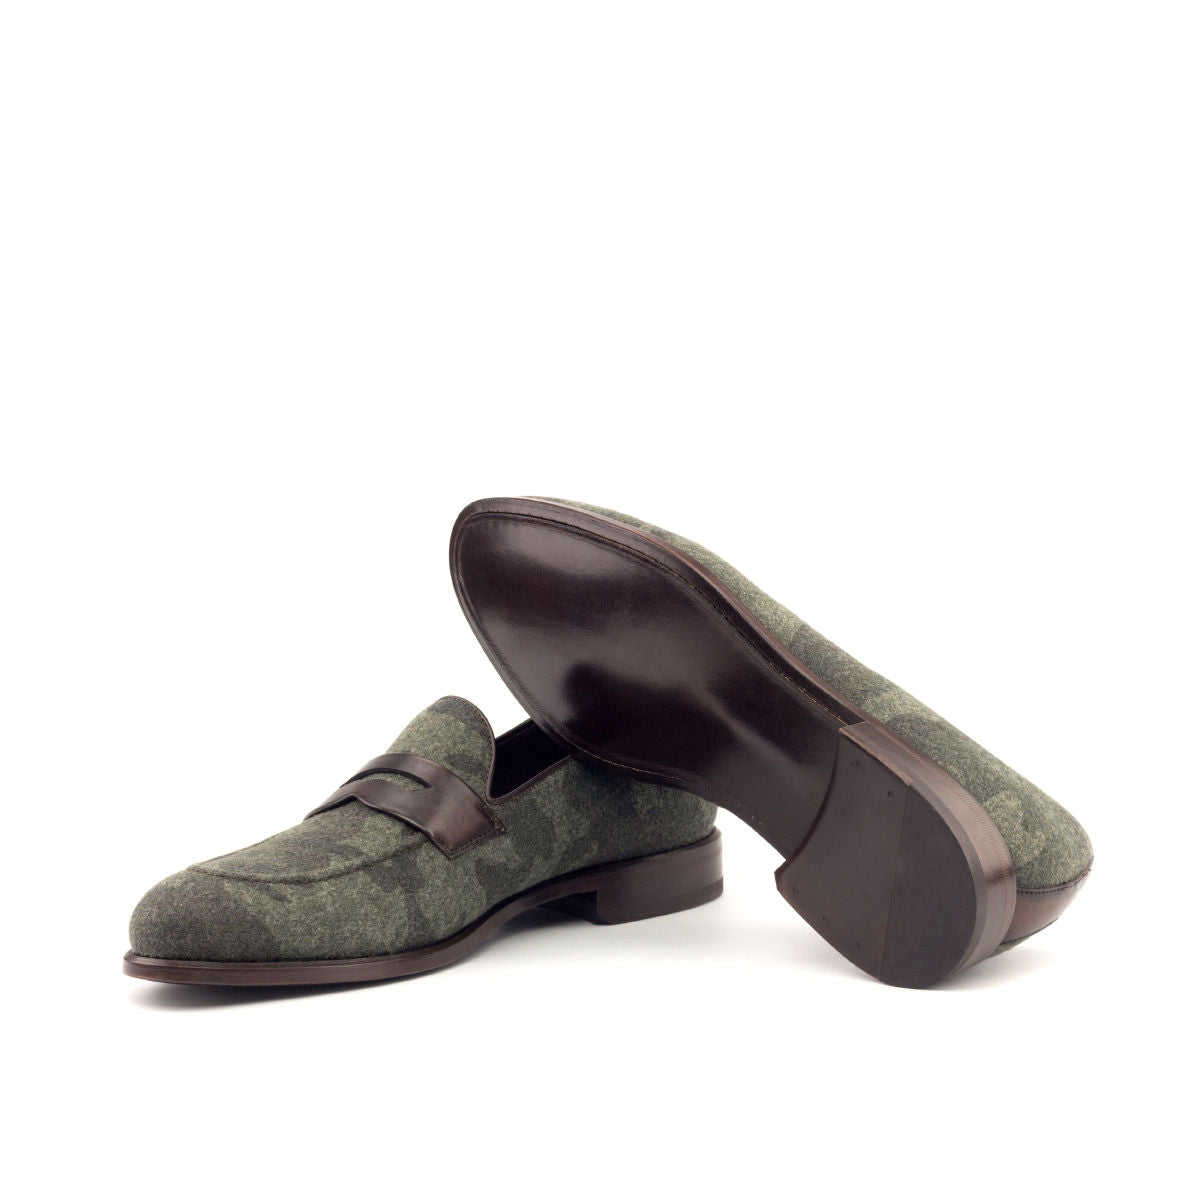 Camo Flannel Loafer